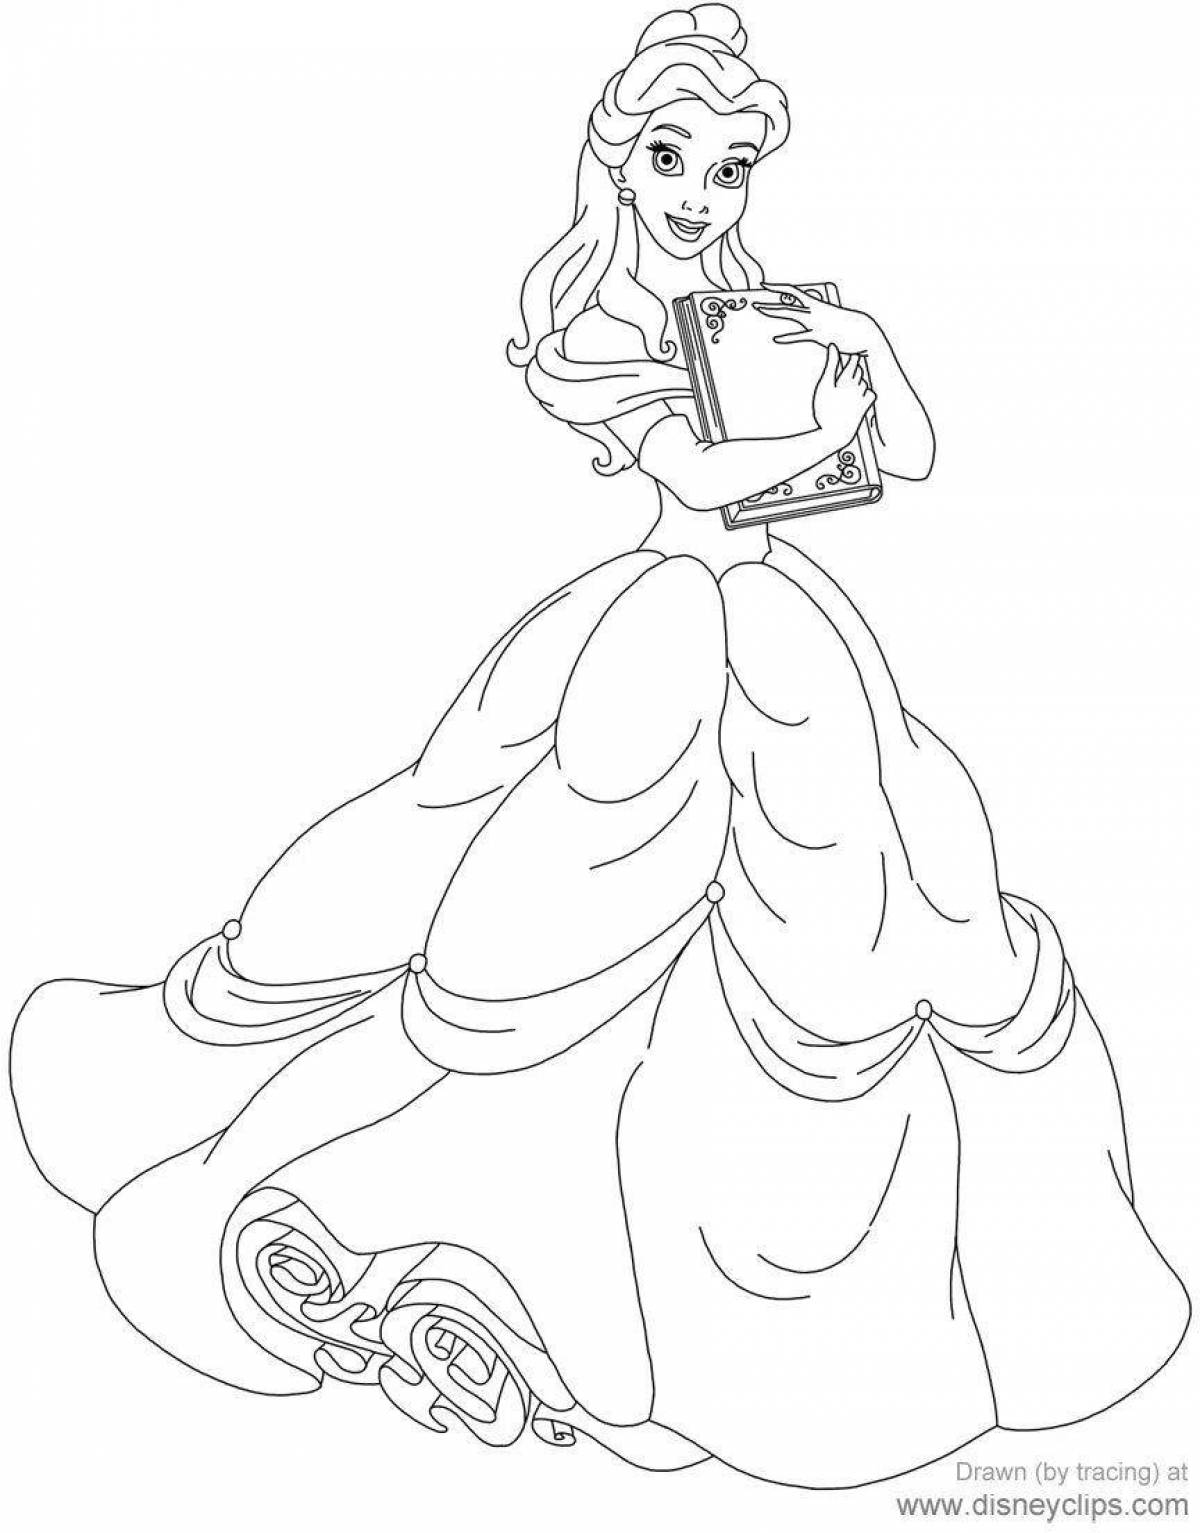 Charming princess belle coloring book